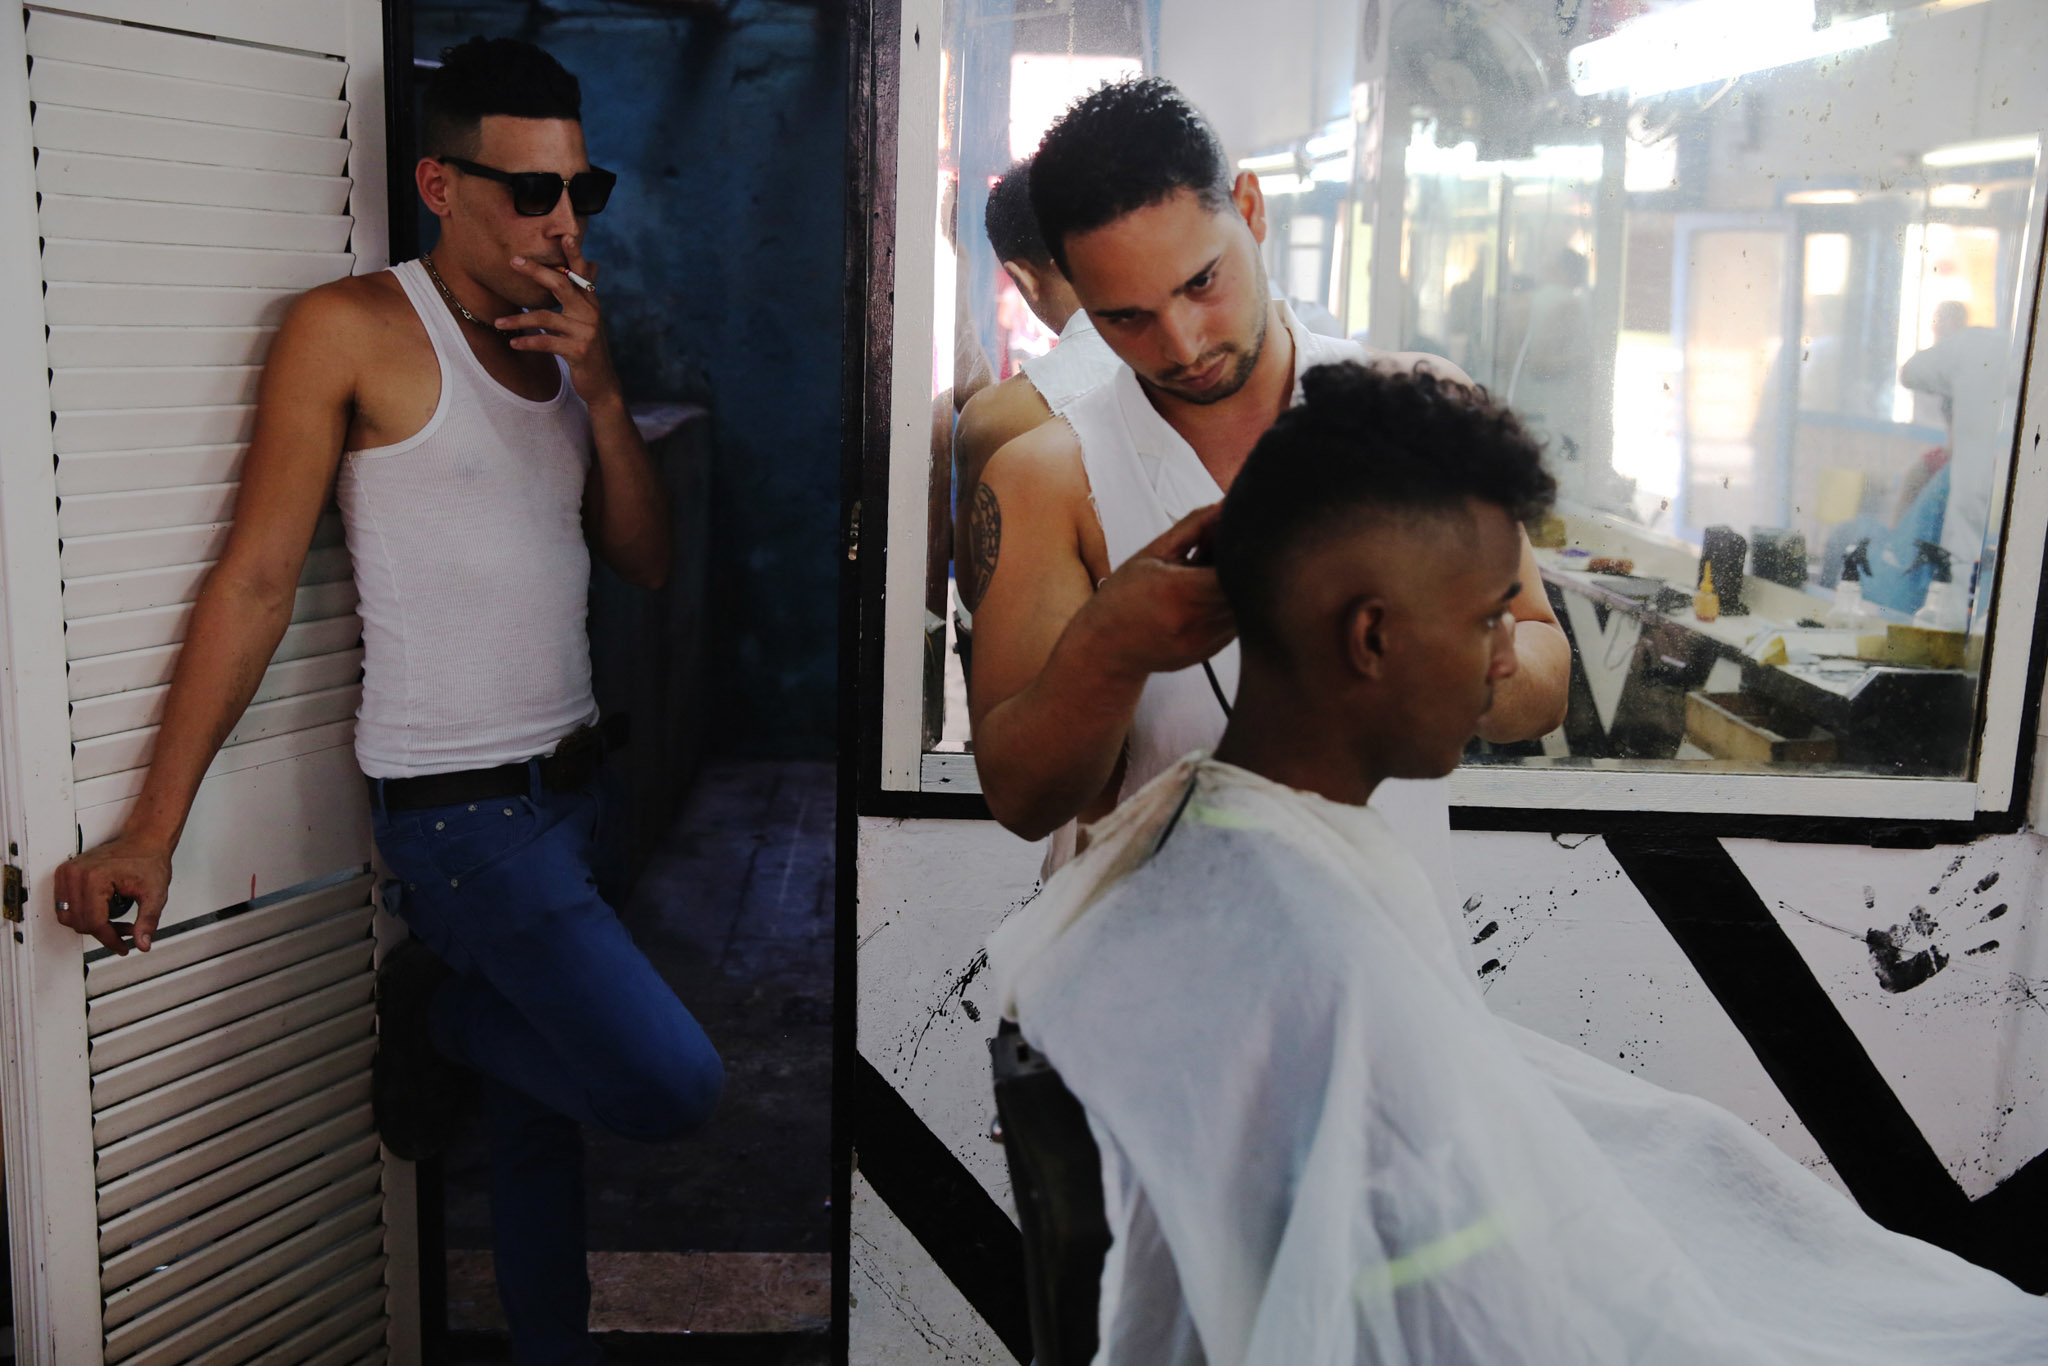 HAIRCUTS OF HAVANA — Russell Monk